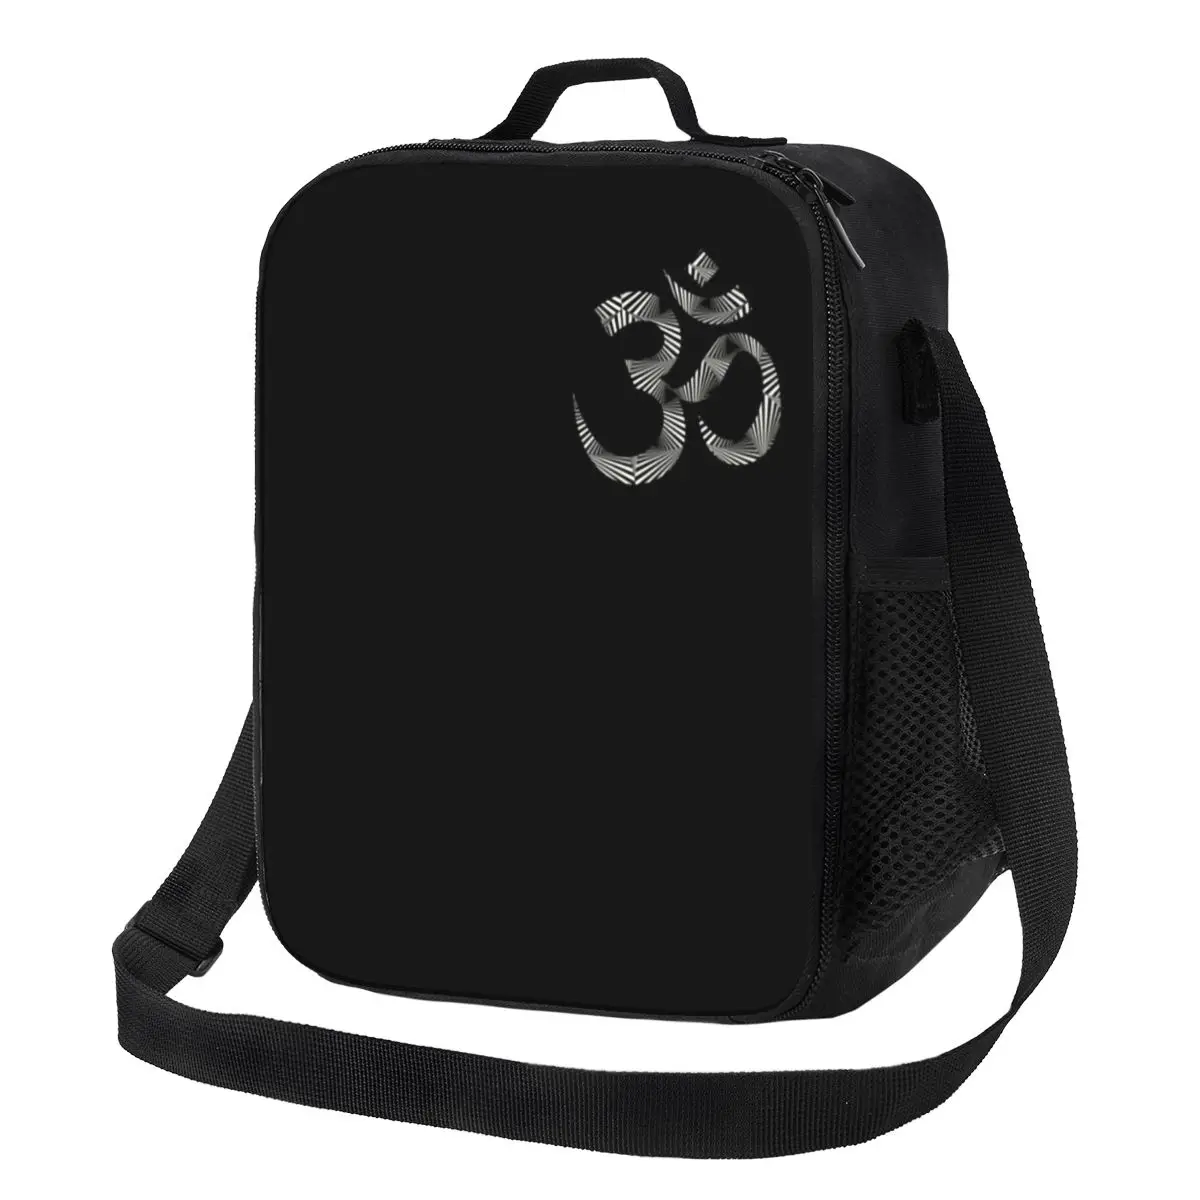 

Spiritual Om Mandala Thermal Insulated Lunch Bags Yoga Buddhism Aum Resuable Lunch Tote for Work Travel Storage Bento Food Box